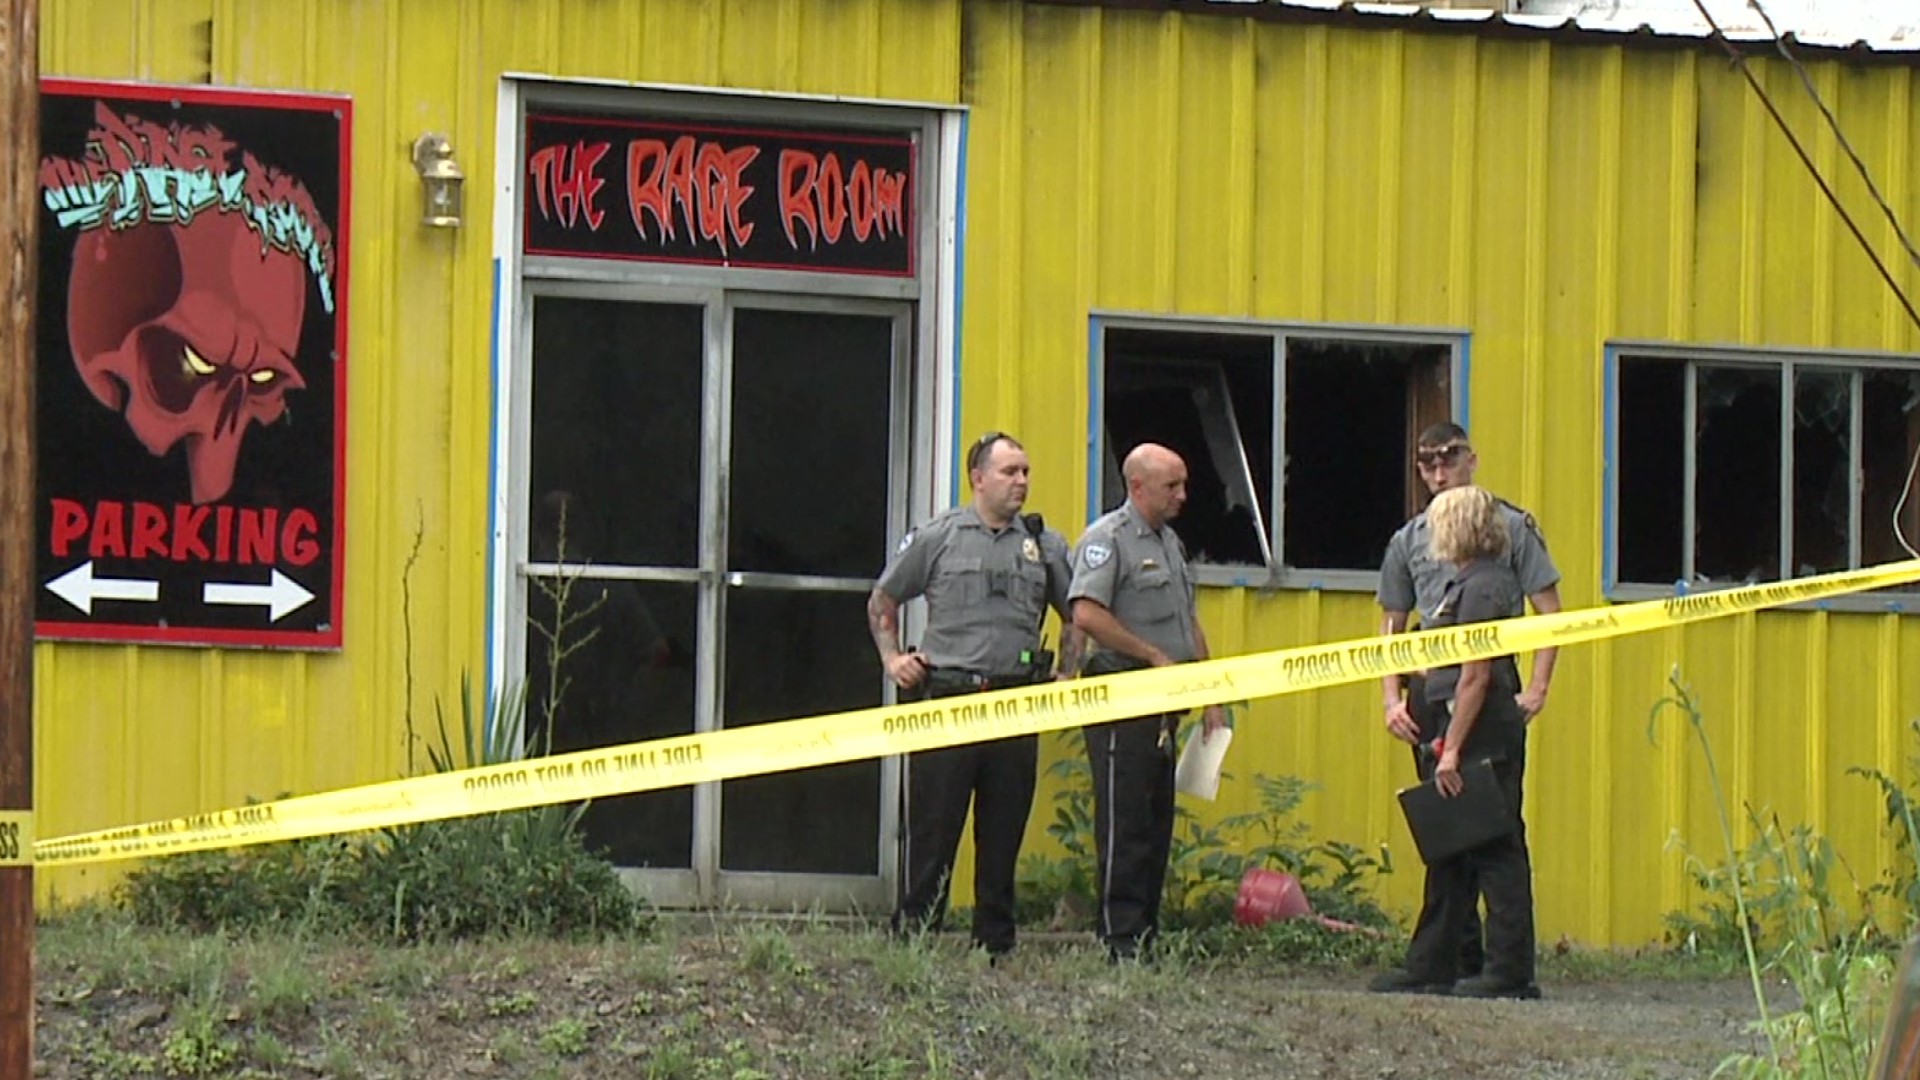 Someone torched a rage room business in Luzerne County Thursday night, and police are currently looking for the suspect.